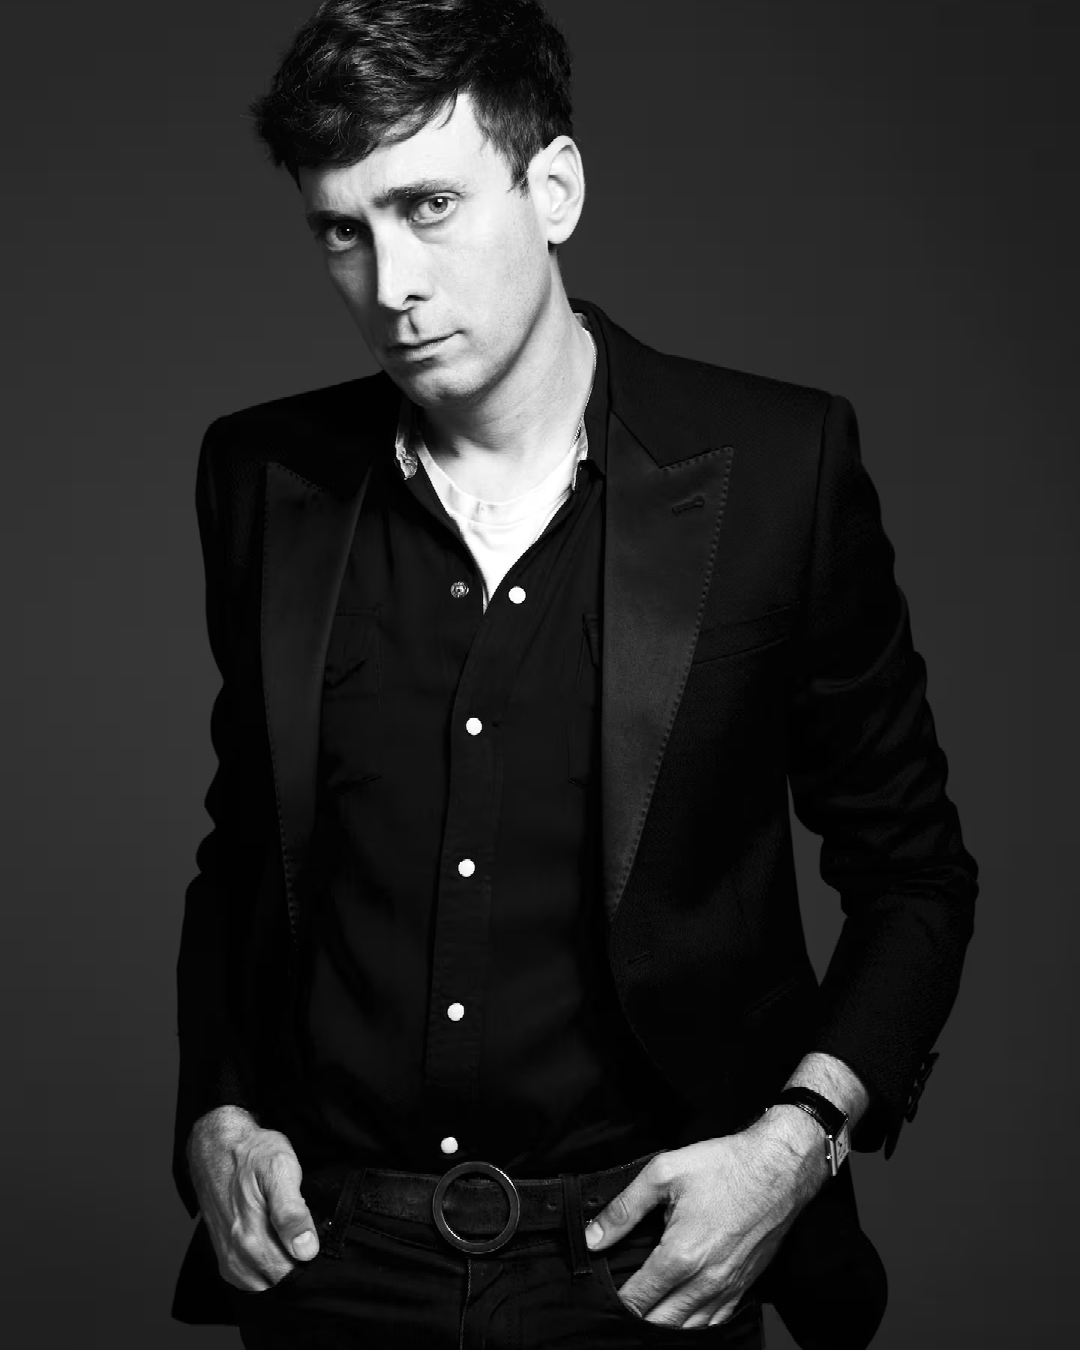 Hedi Slimane May Leave Celine as Contract Negotiations with LVMH Stall